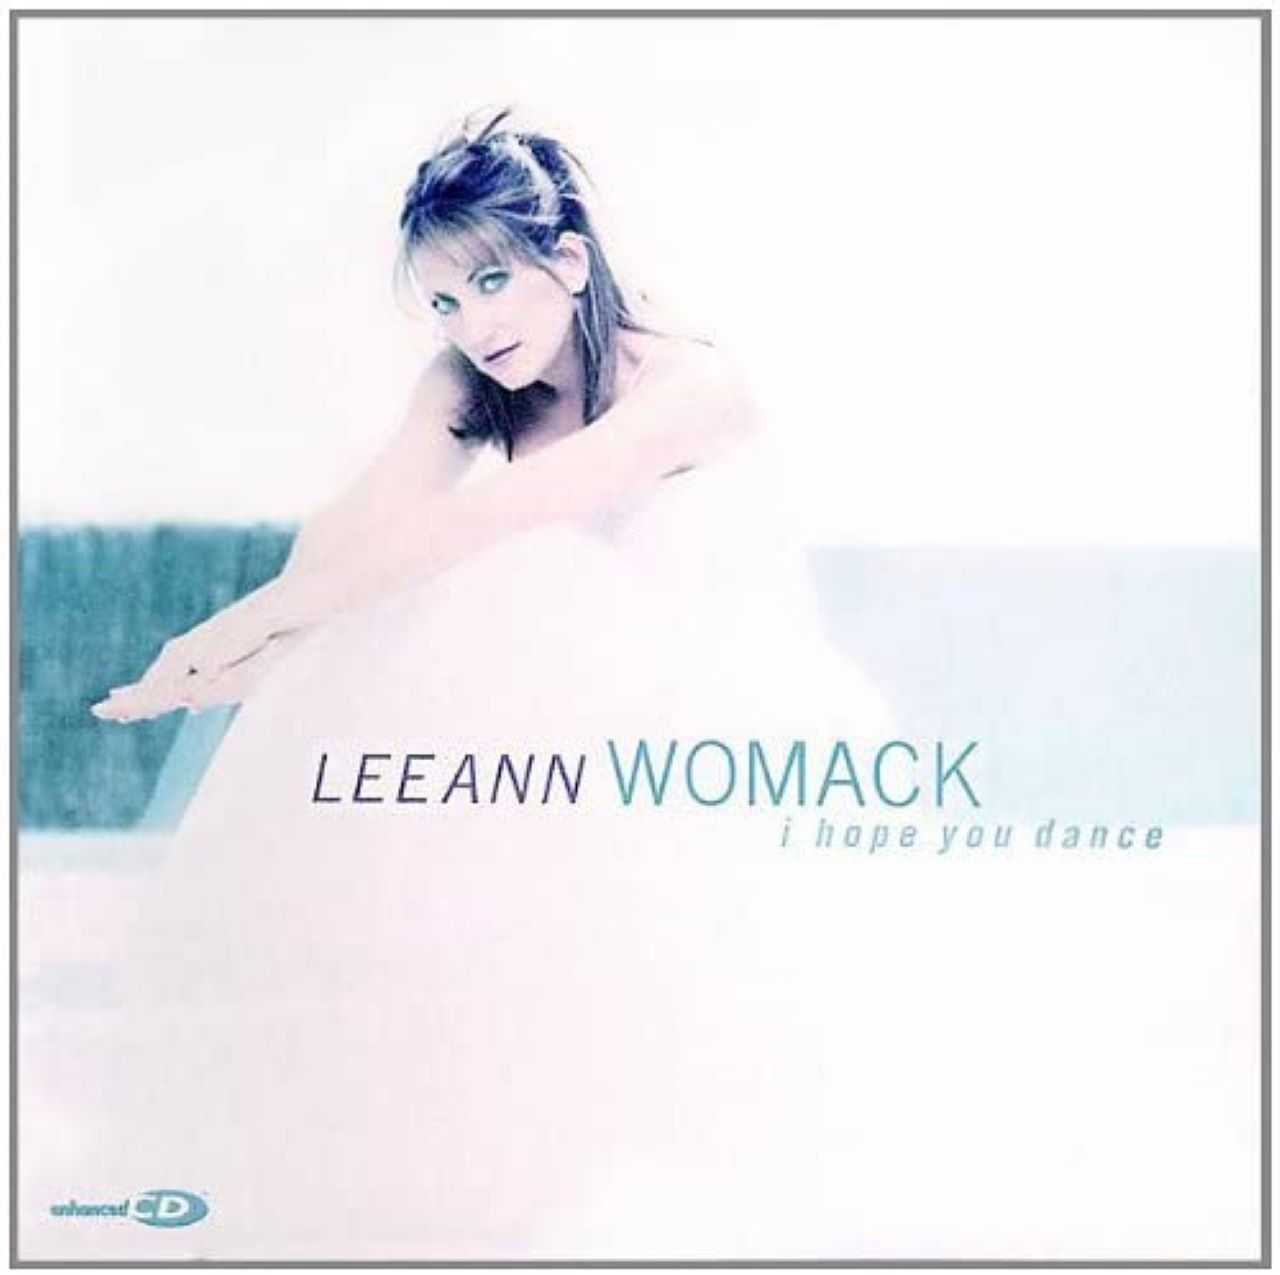 Lee Ann Wormack - I Hope You Dance cover album